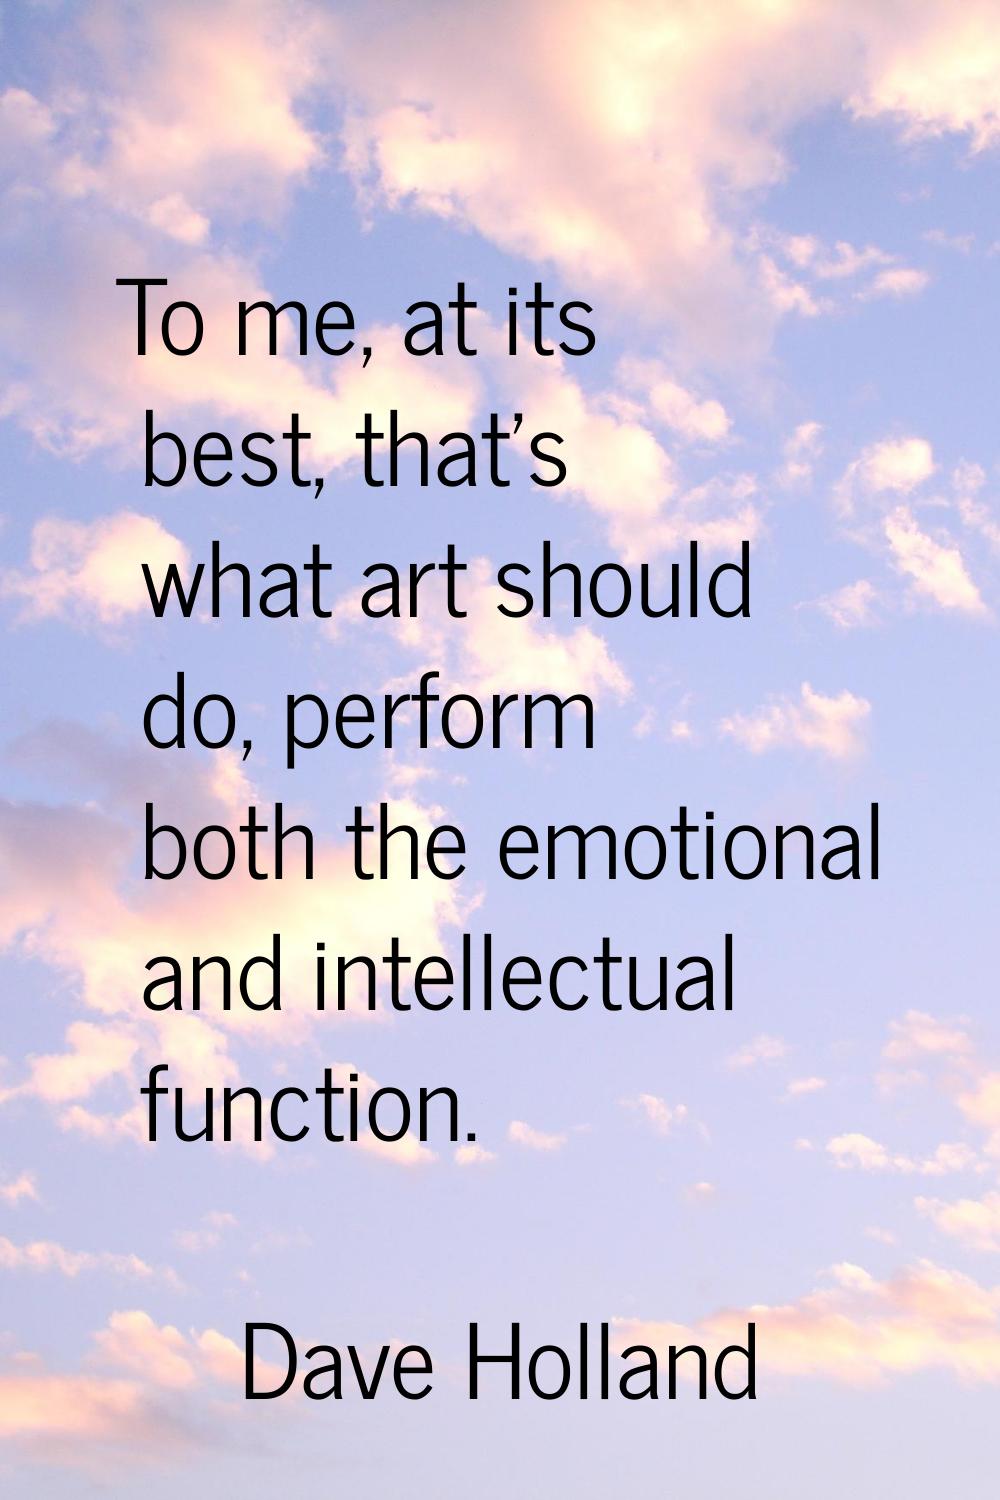 To me, at its best, that's what art should do, perform both the emotional and intellectual function